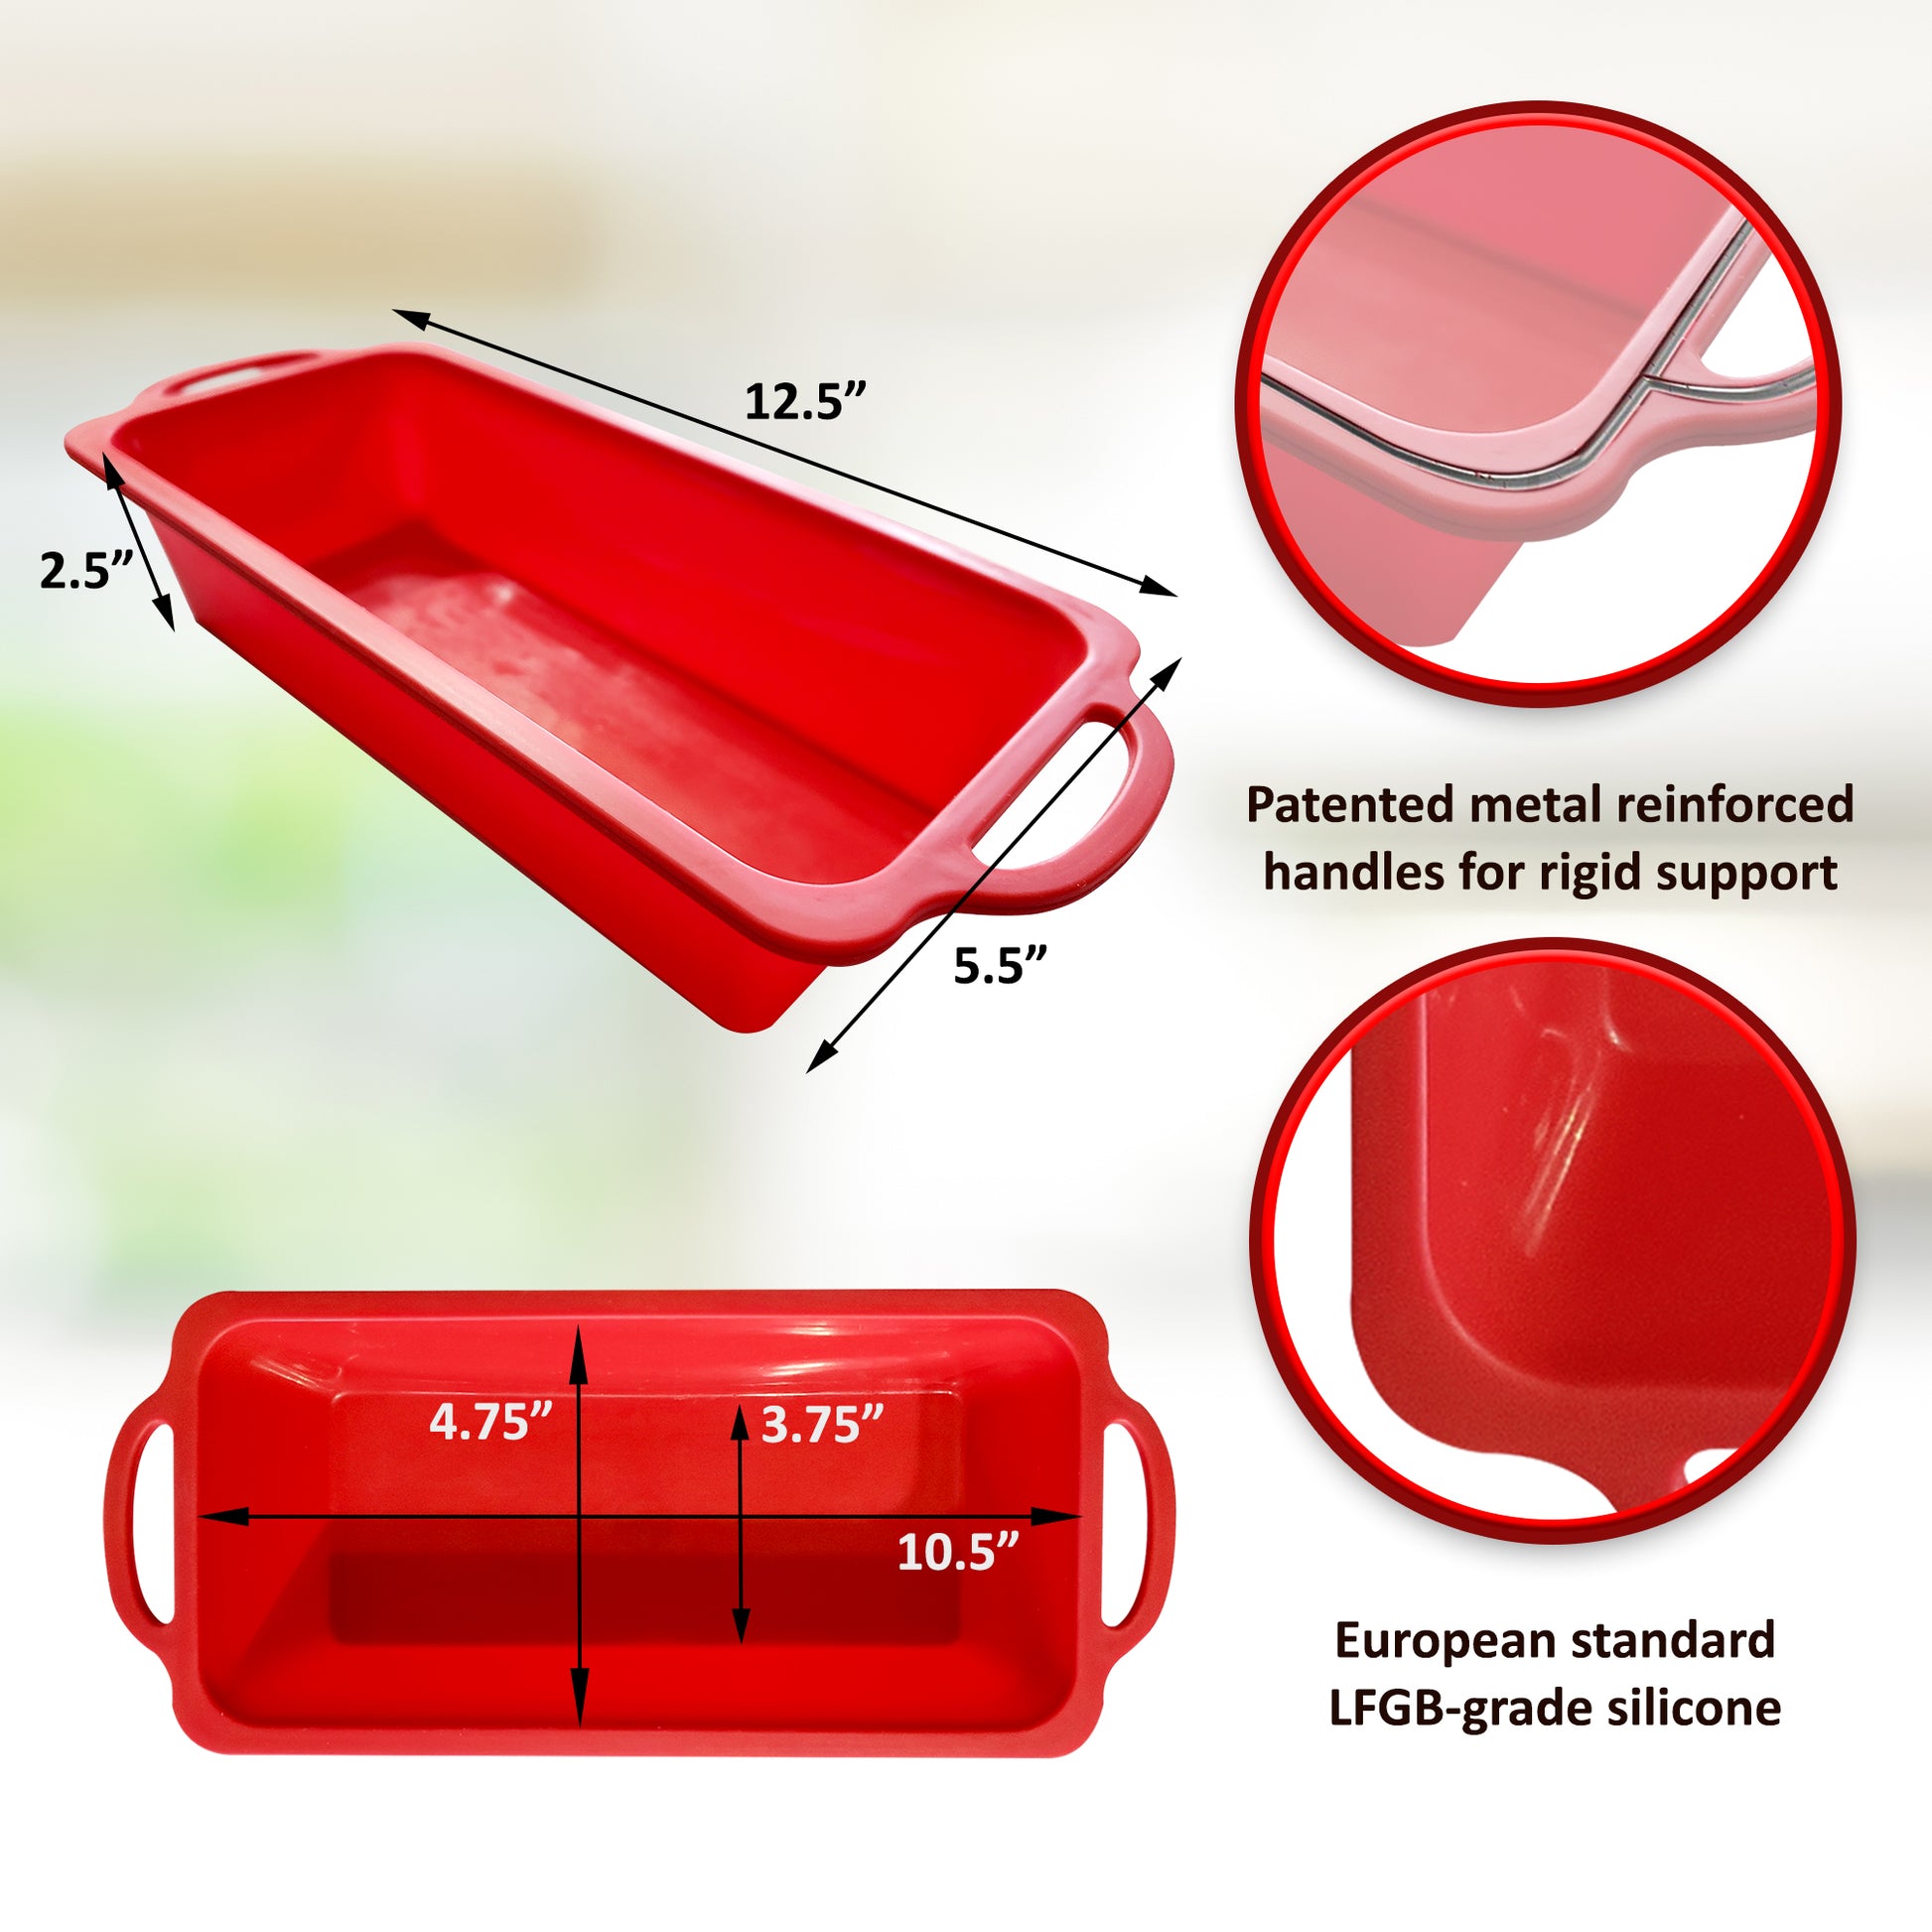 Chicrinum Silicone Bread Loaf Pan, Non-Stick Food Grade Silicone Baking  Mold, Meatloaf Pan with Metal Reinforced Frame More Strength